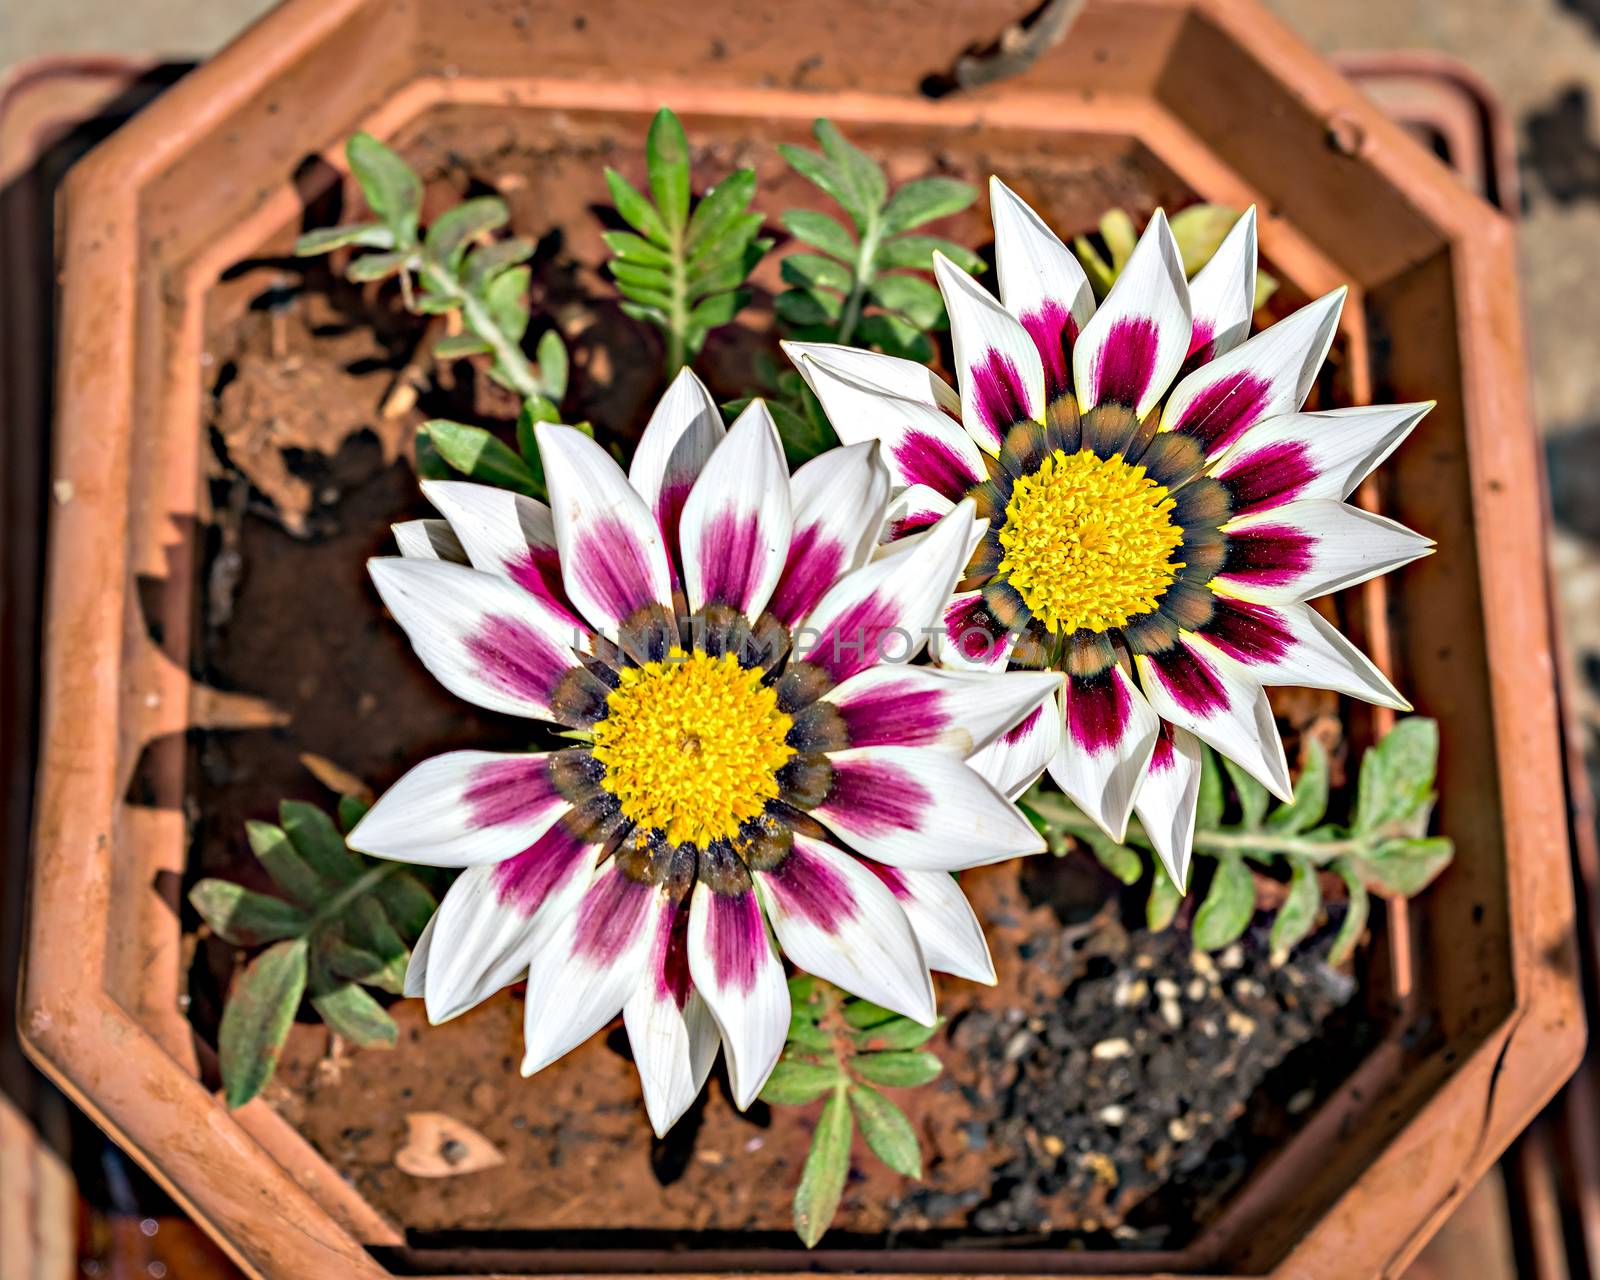 Isolated, close-up image of two white and pink Gazania flower in a squarish pot with yellow center.